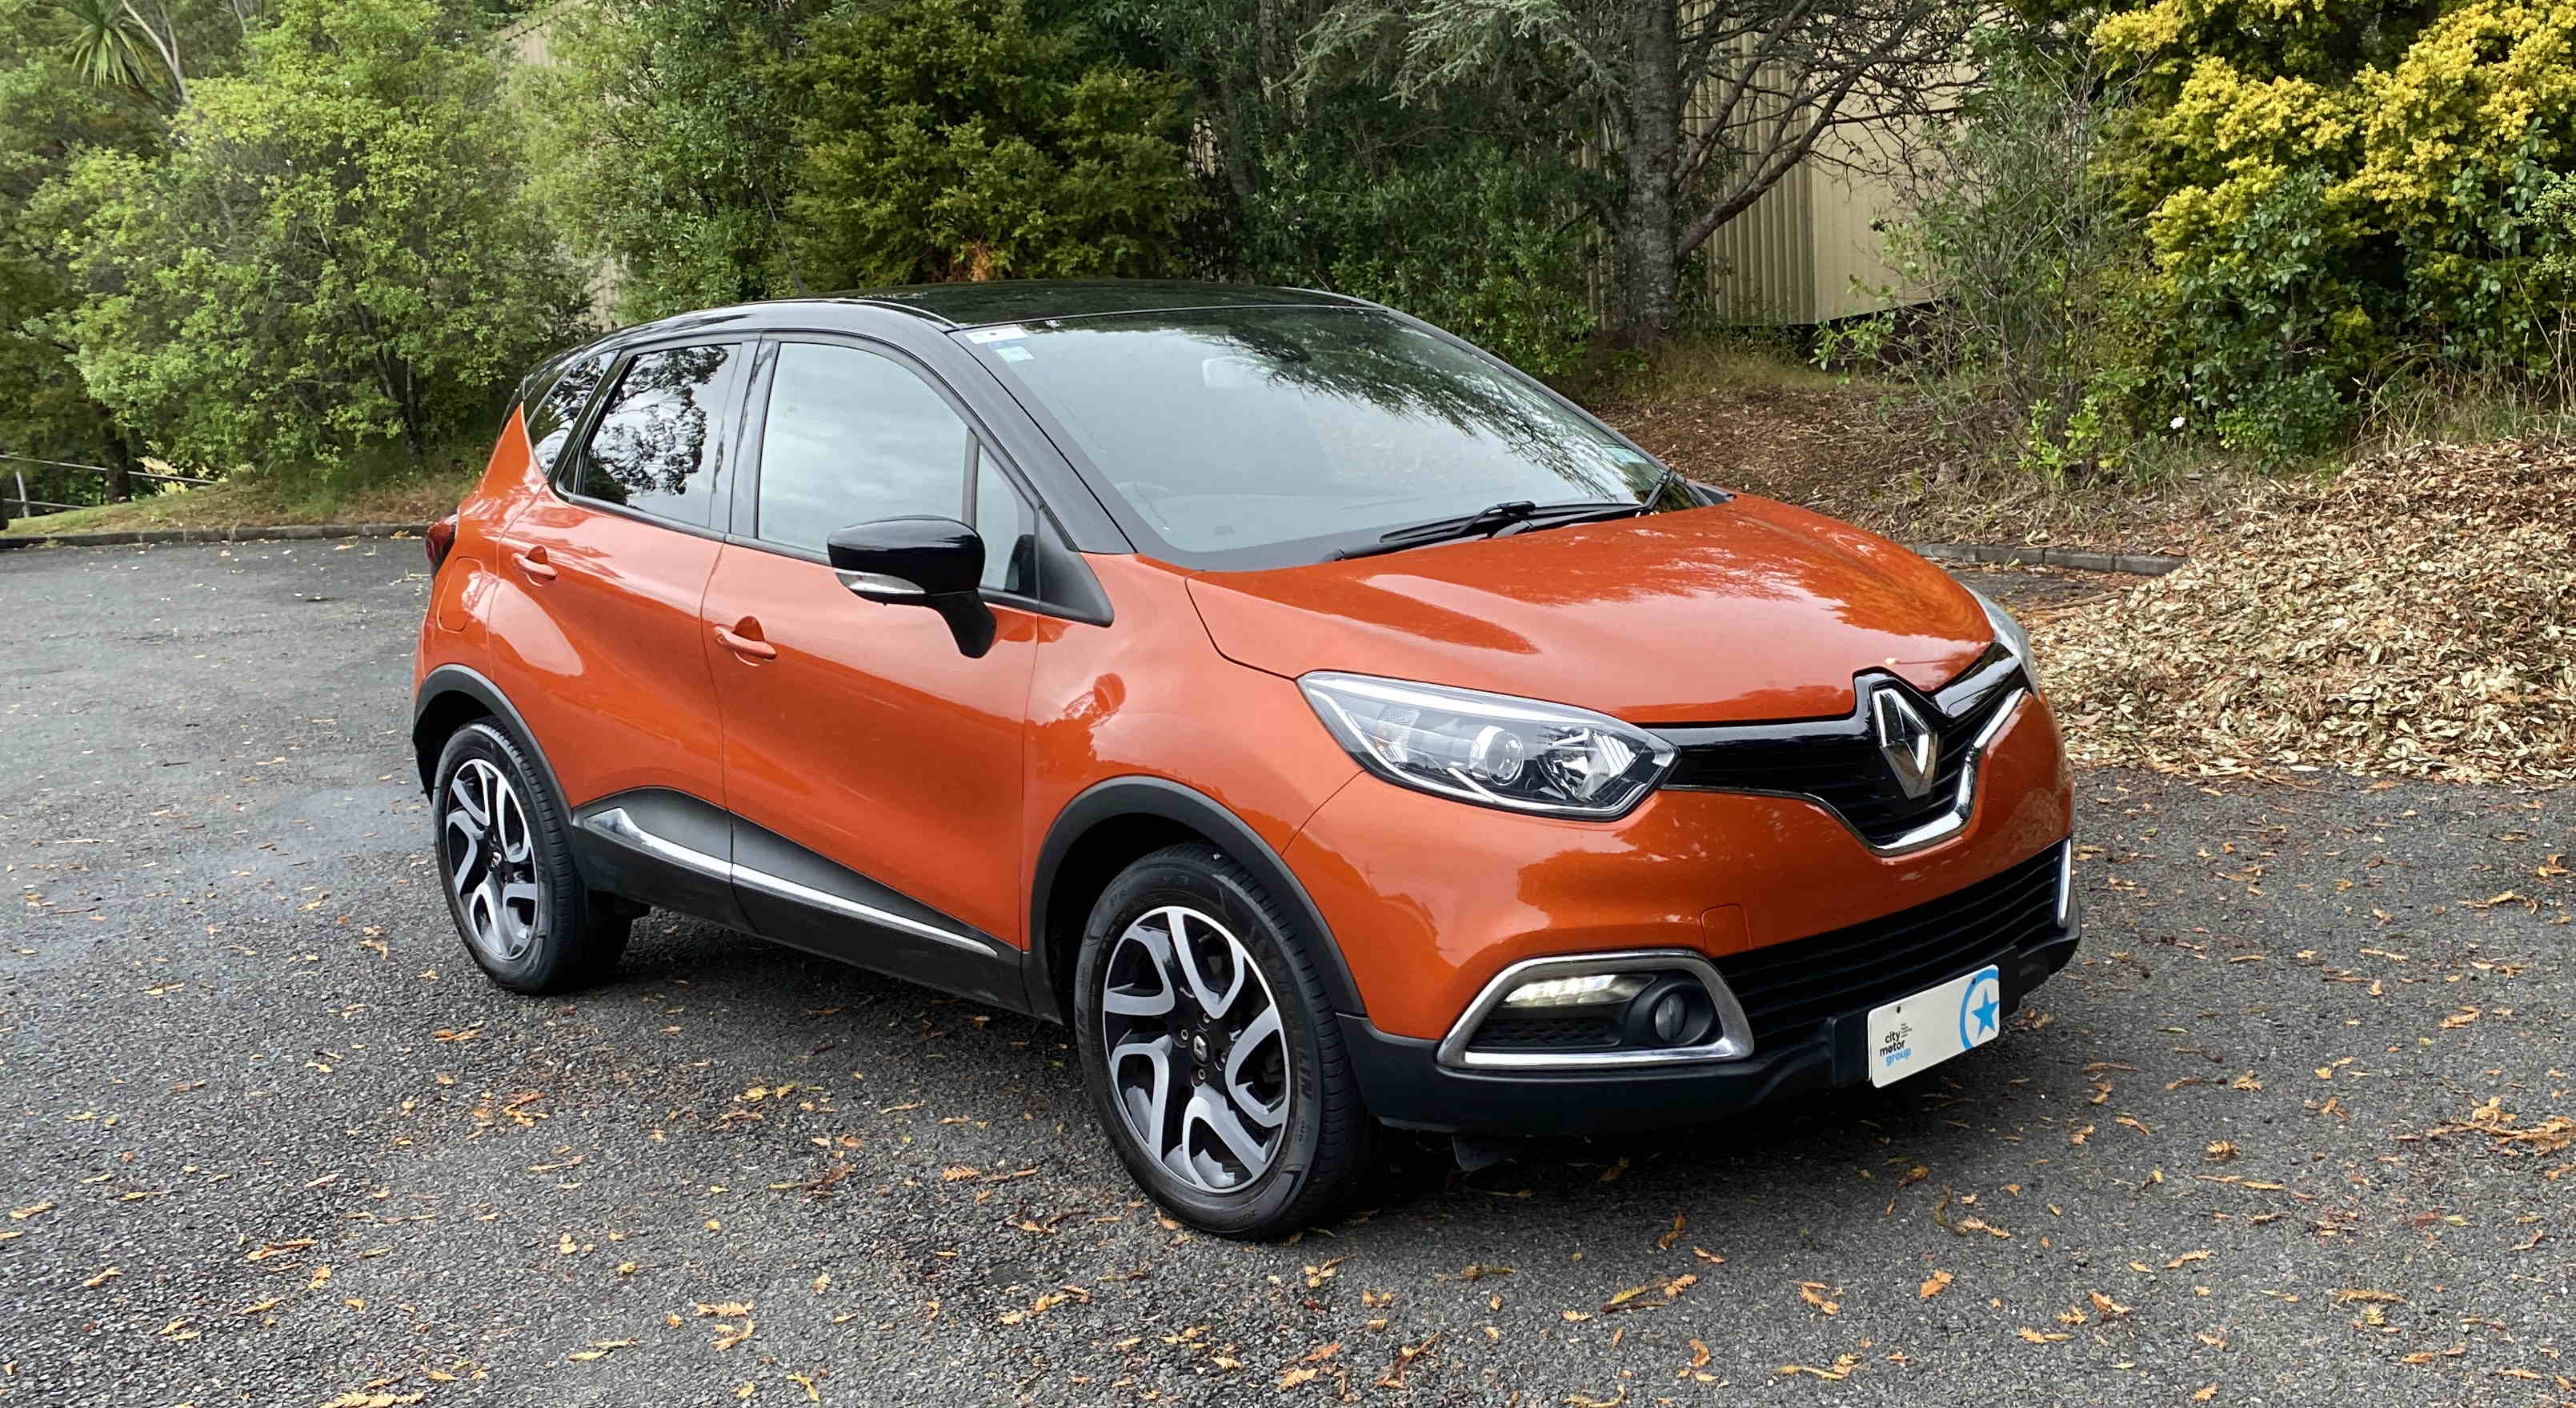 Used Car Review: Renault Captur (2016) | AA New Zealand